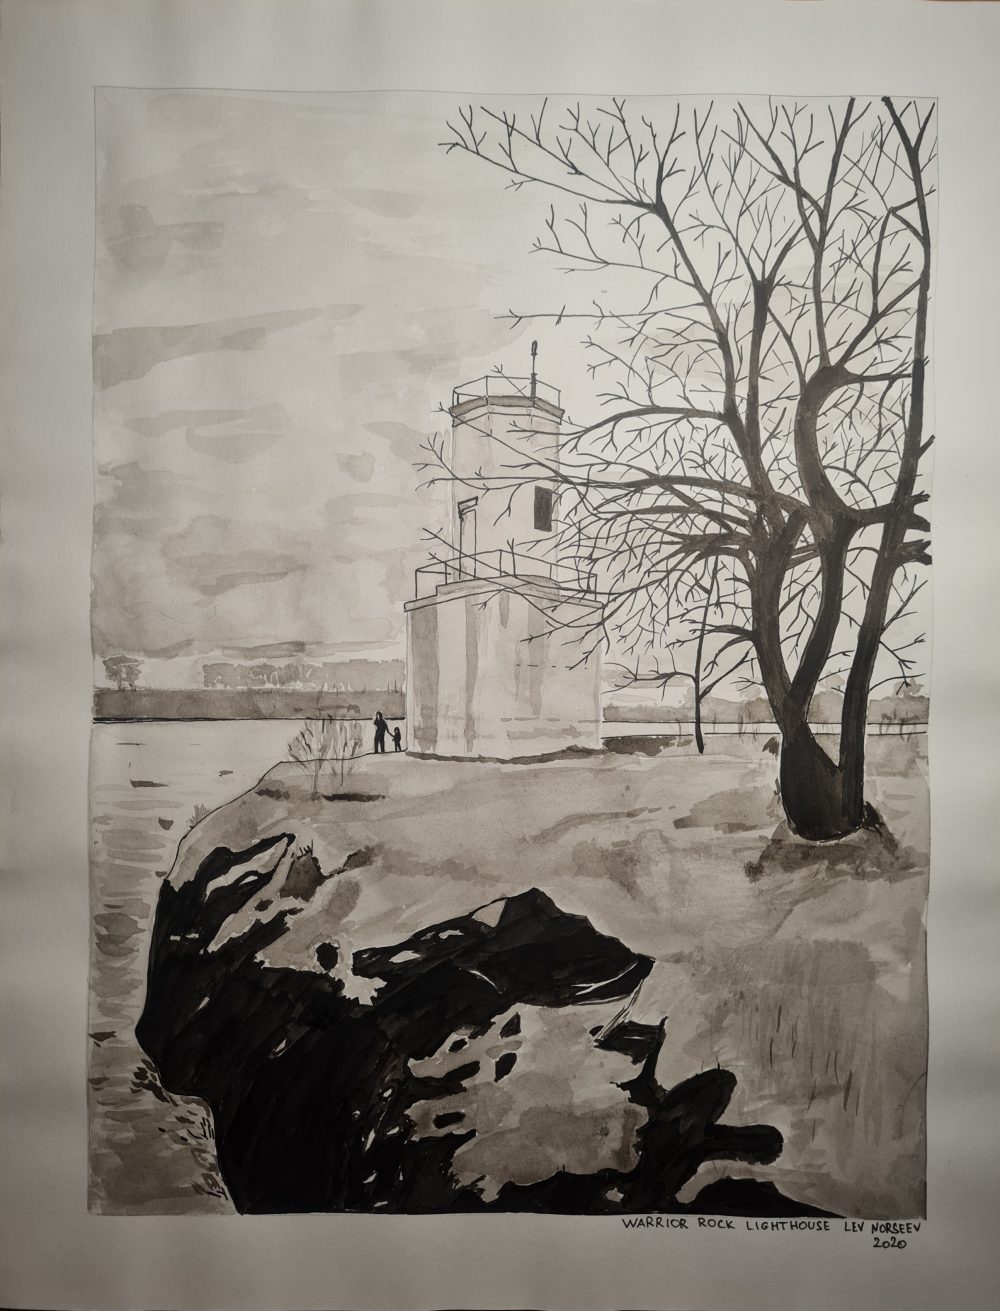 A monochrome drawing of the landscape with a bare tree; a lighthouse and two figures staying on the riverside next to them under the overcast sky.